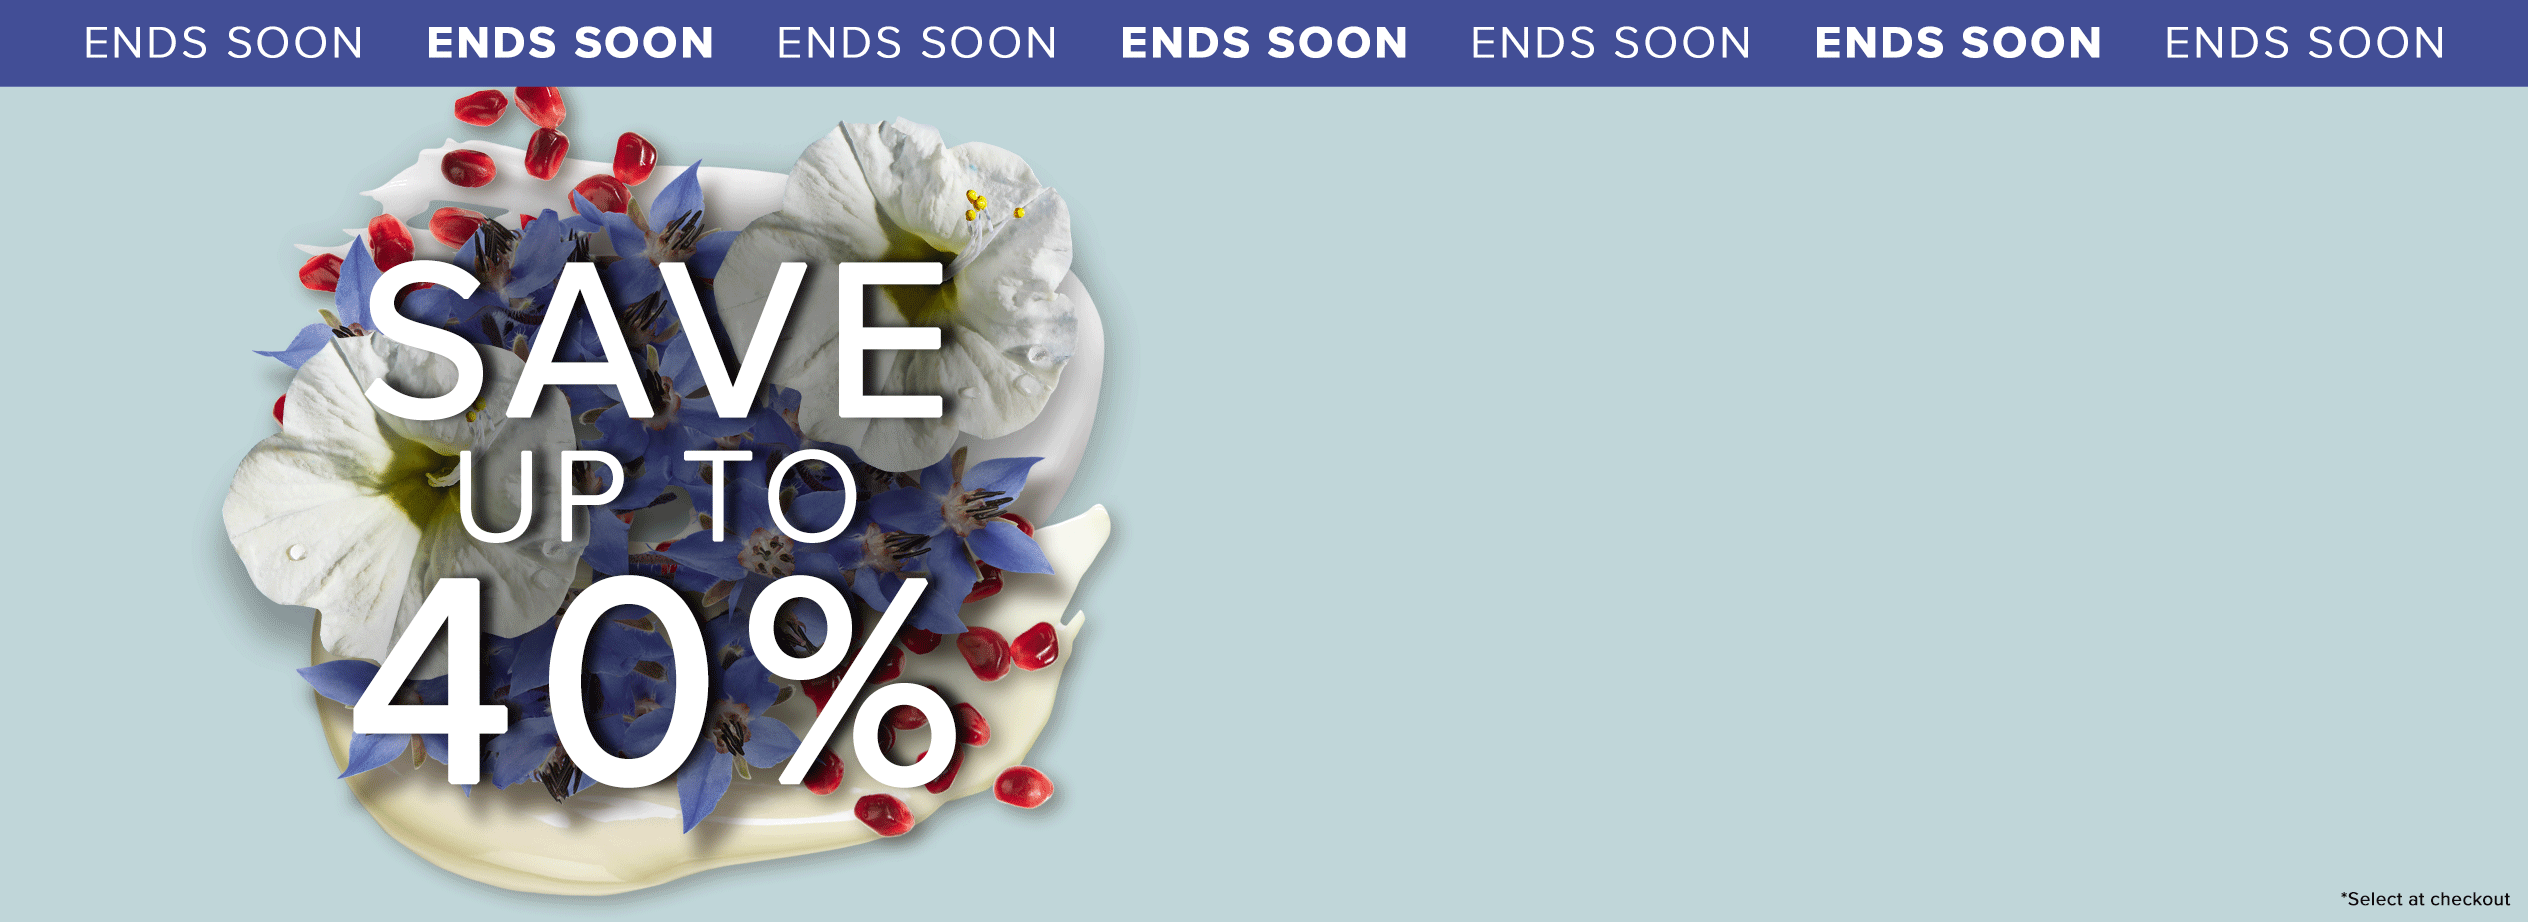 SPRING SALE SAVE UP TO 40%